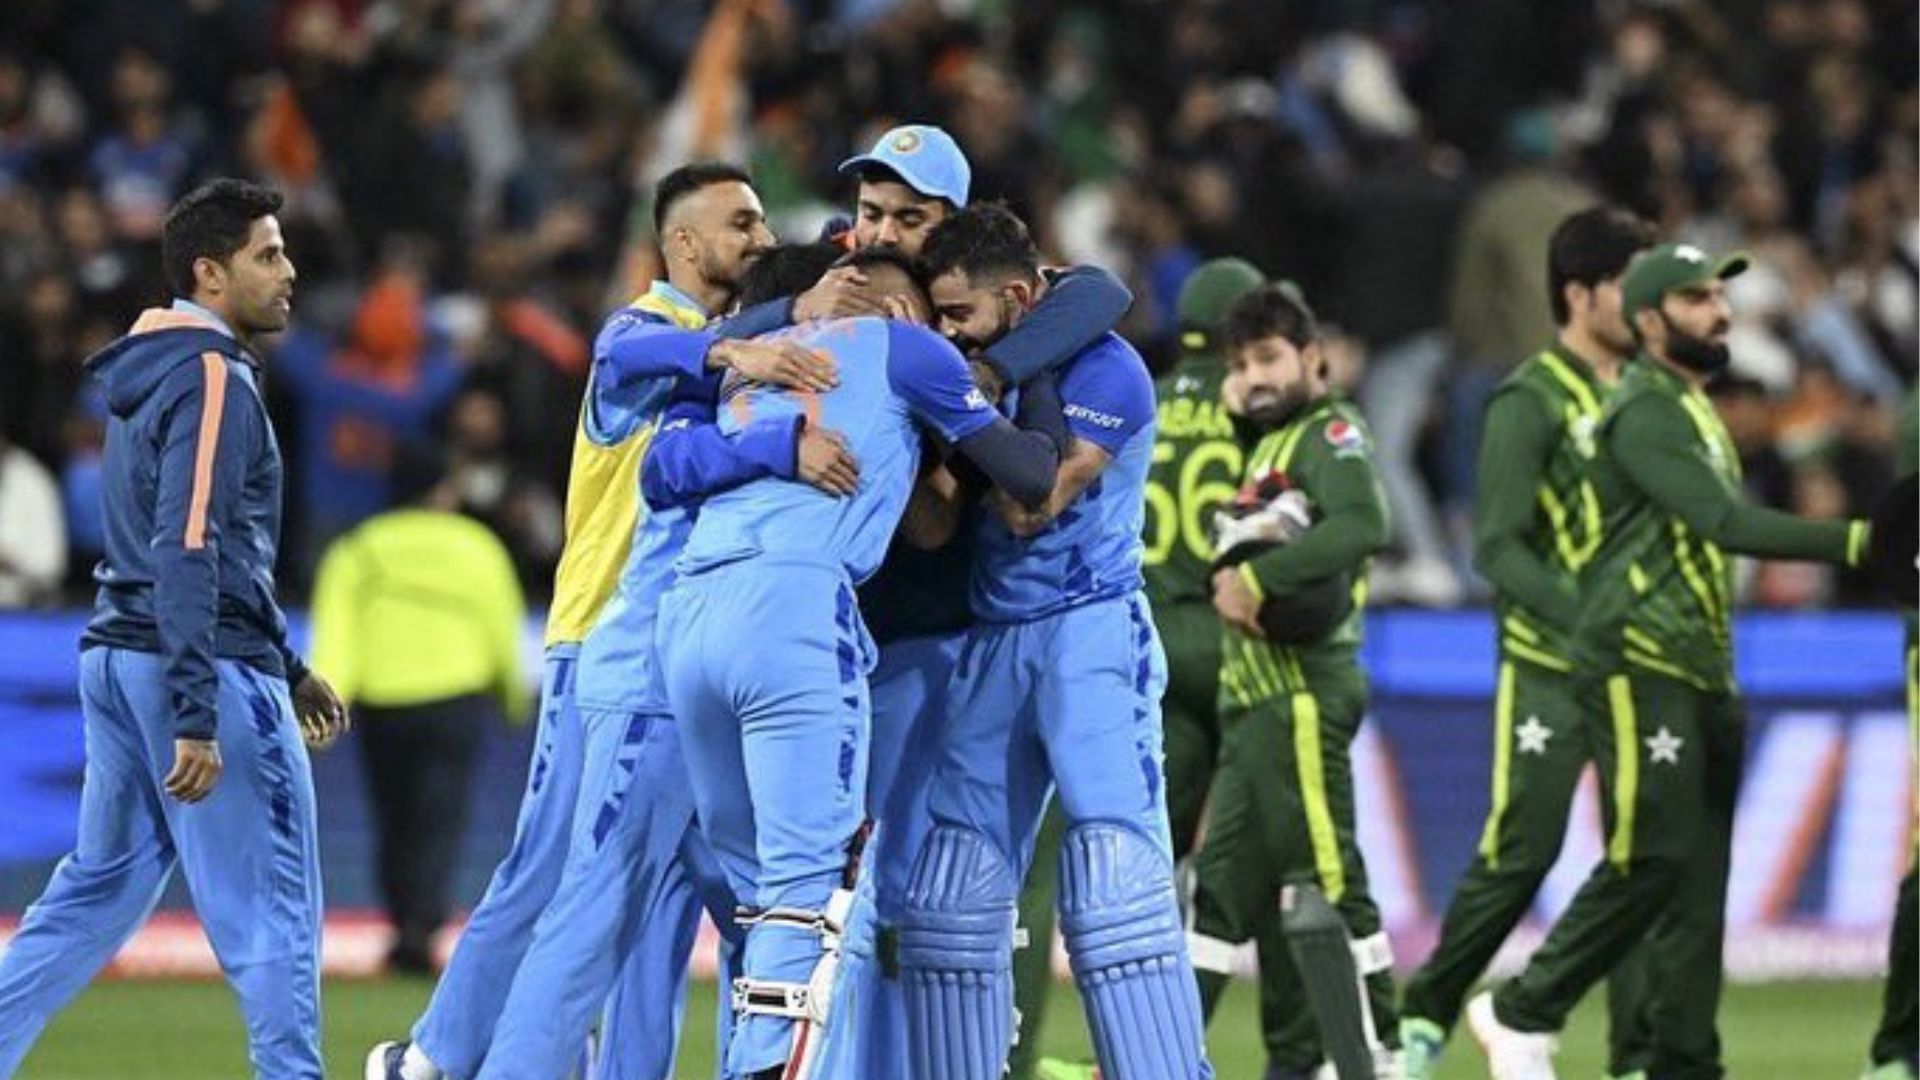 India defeated Pakistan by 4 wickets on the final delivery of the match.